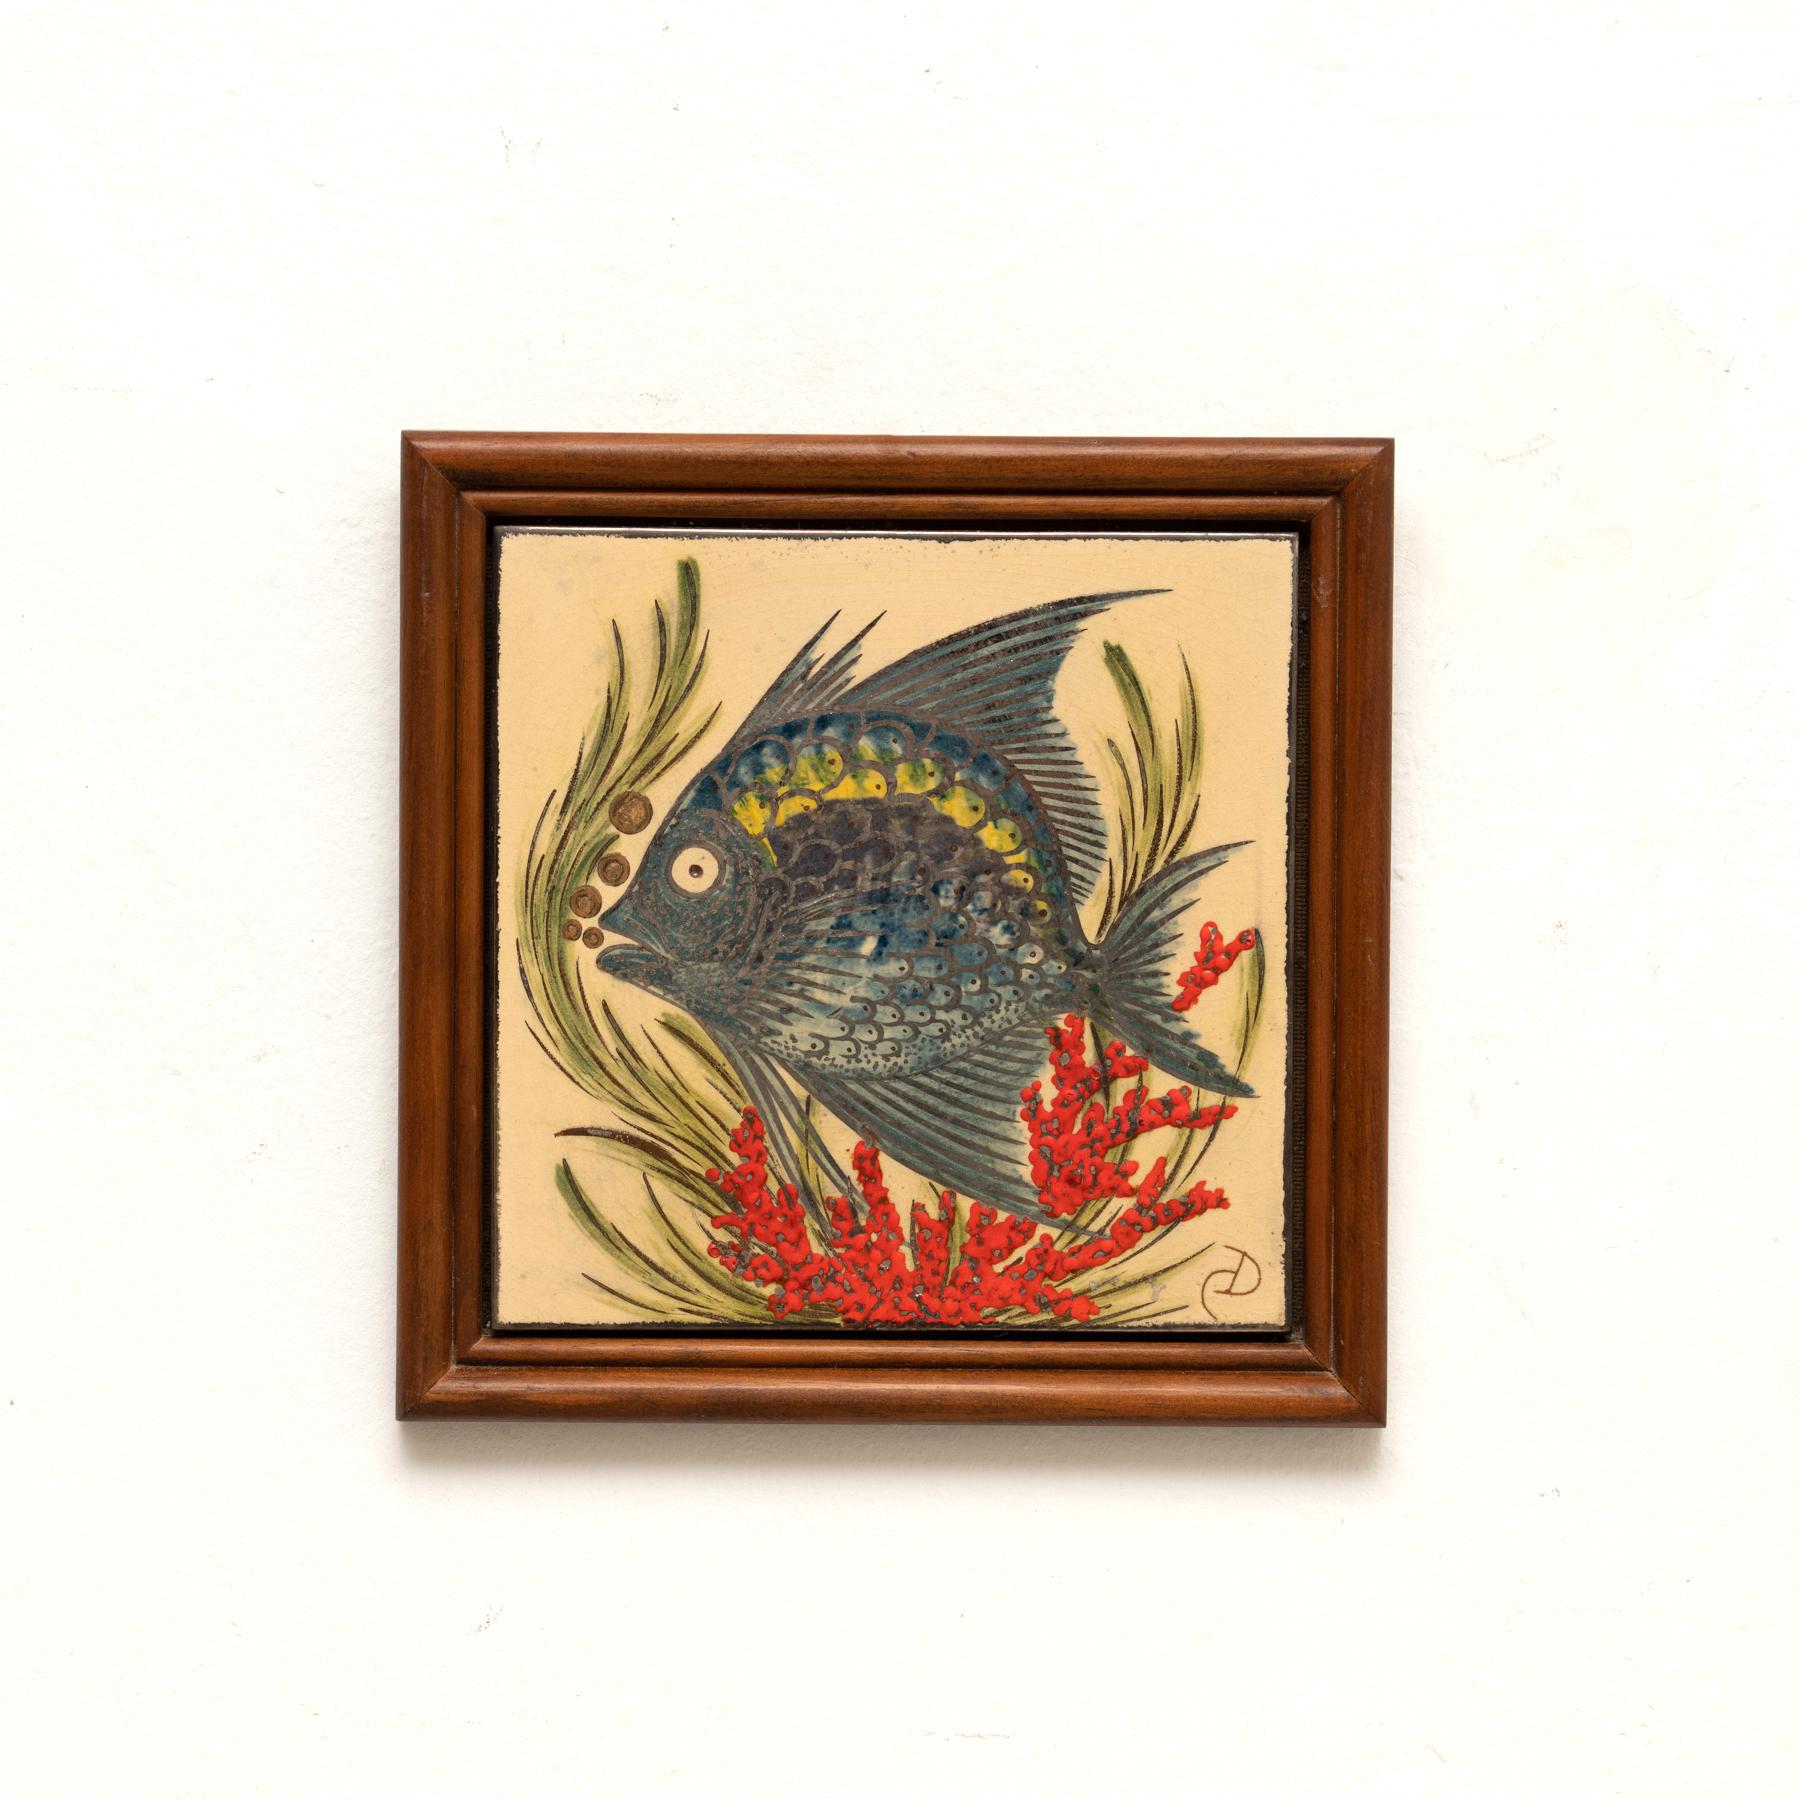 Ceramic hand painted artwork of a fish design by Catalan artist Diaz Costa, circa 1960.
Framed. Signed.

In original condition, with minor wear consistent of age and use, preserving a beautiul patina.